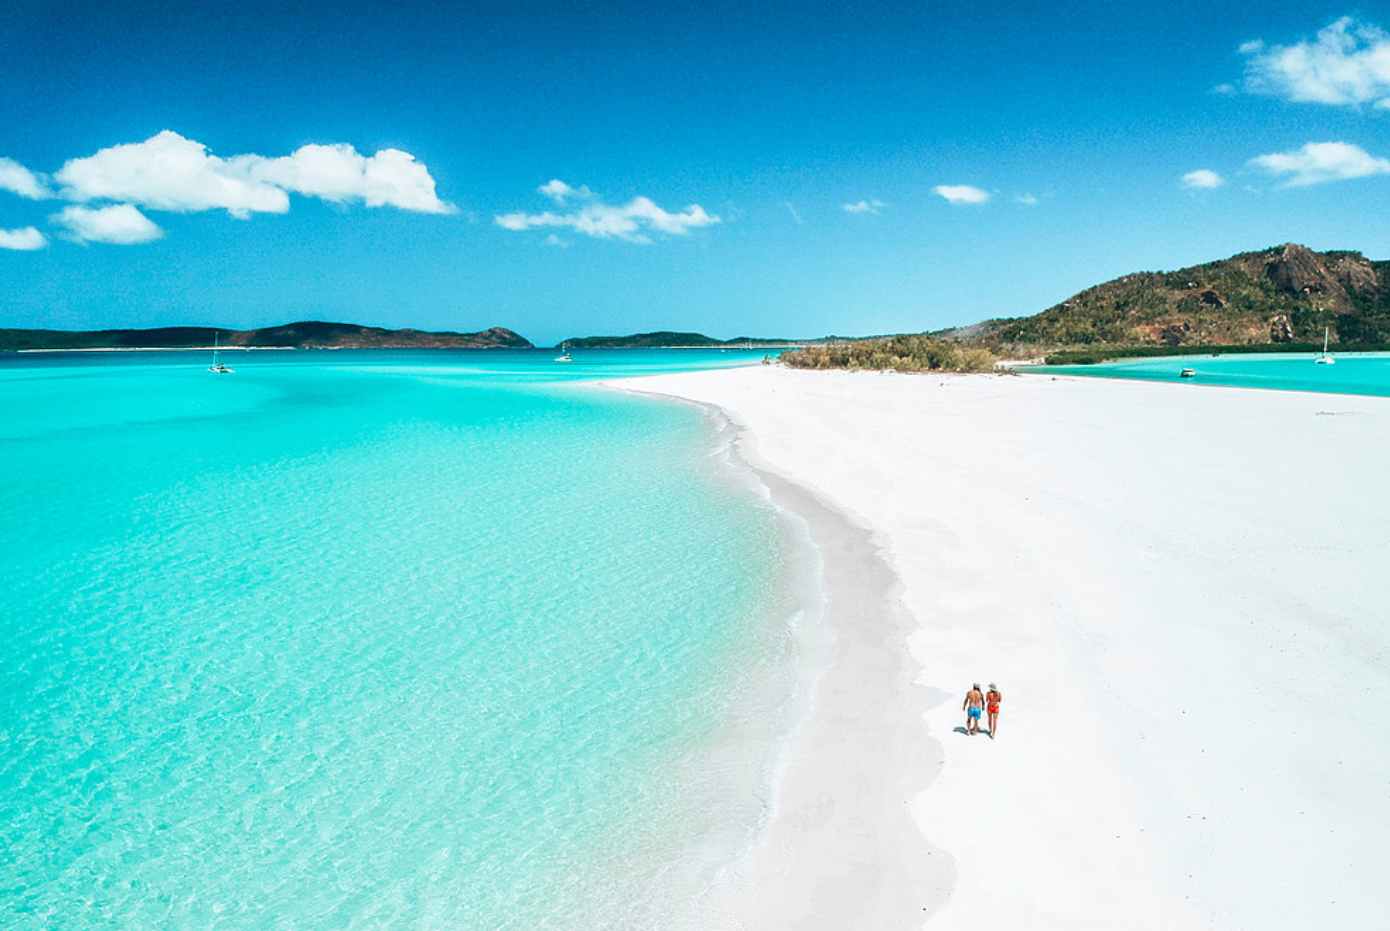 a body of water with Whitehaven Beach in the background